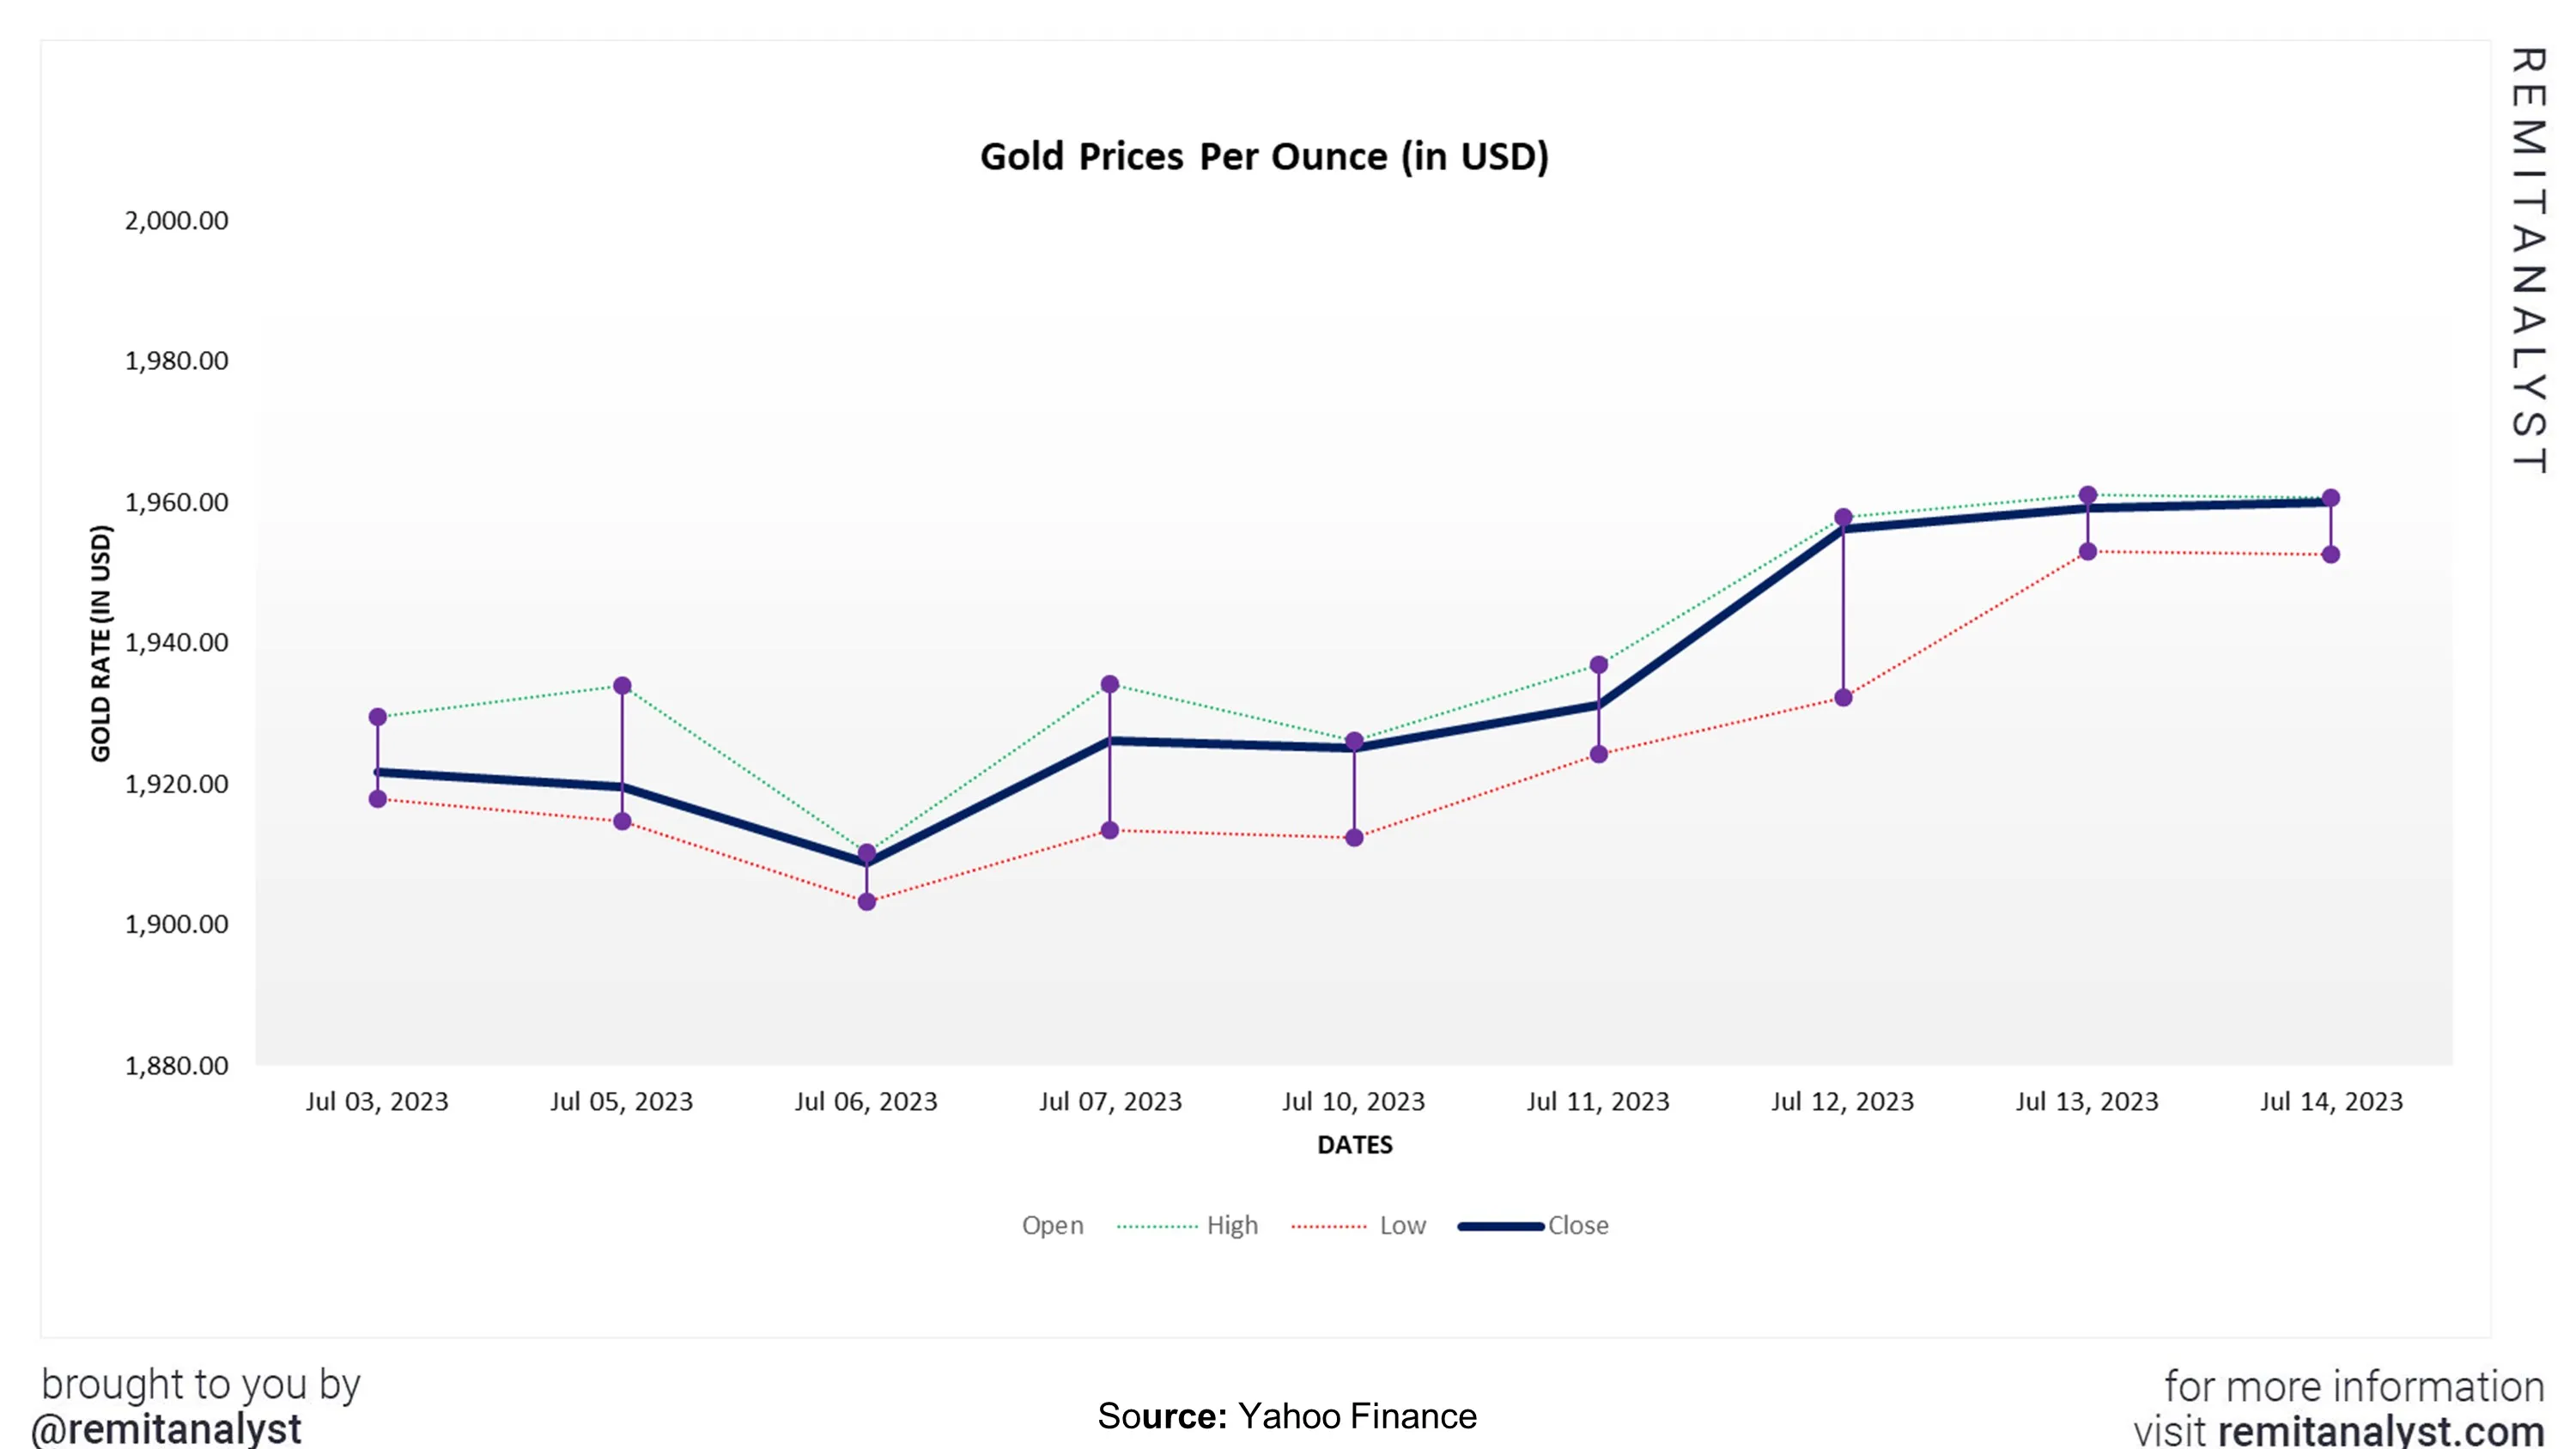 gold-prices-from-3-jul-2023-to-14-jul-2023